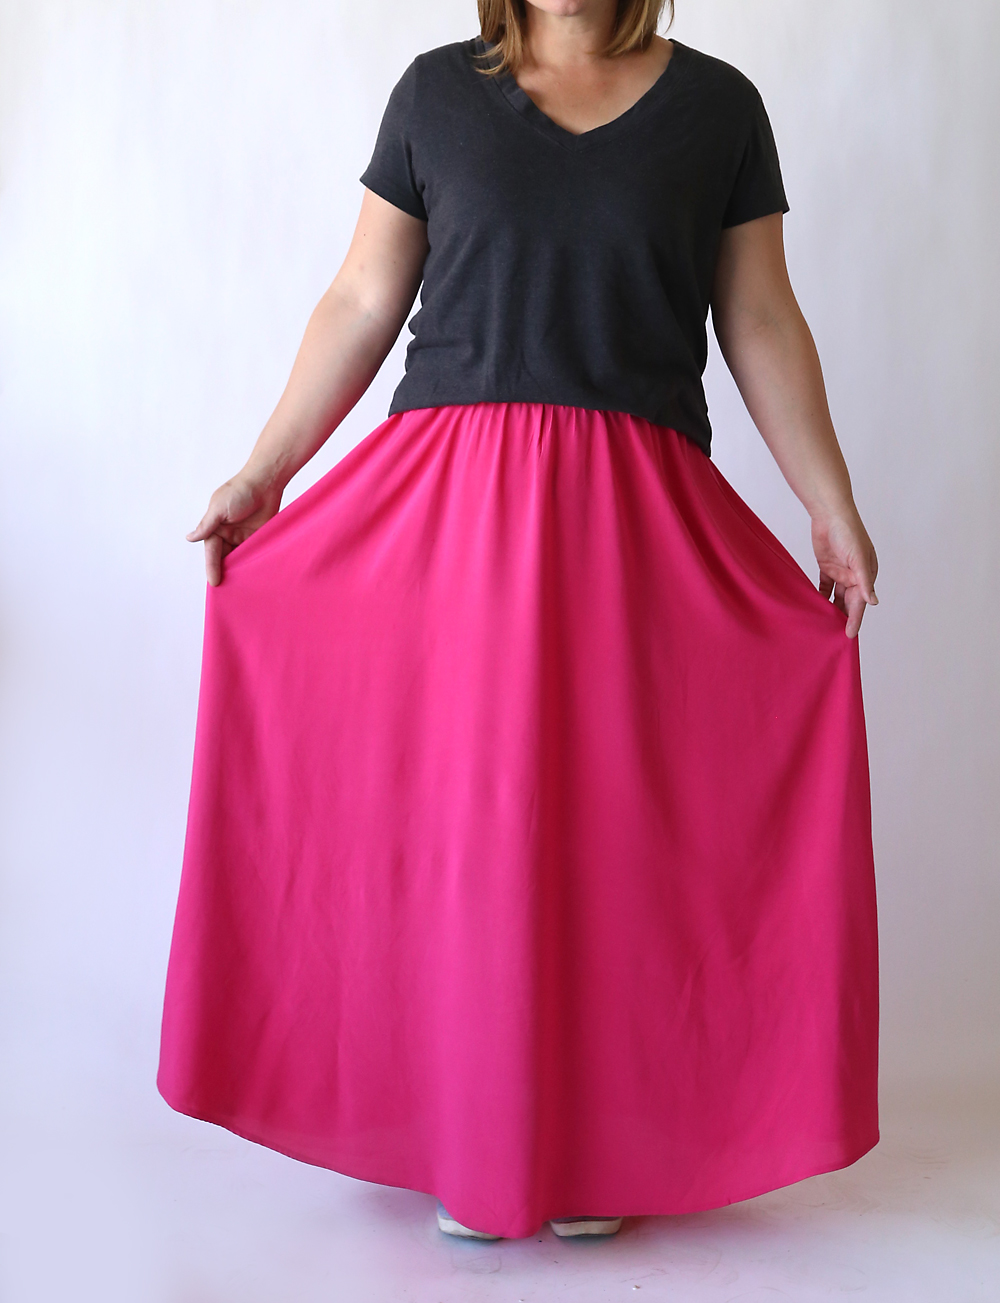 the everyday maxi skirt | easy sewing tutorial - It's Always Autumn